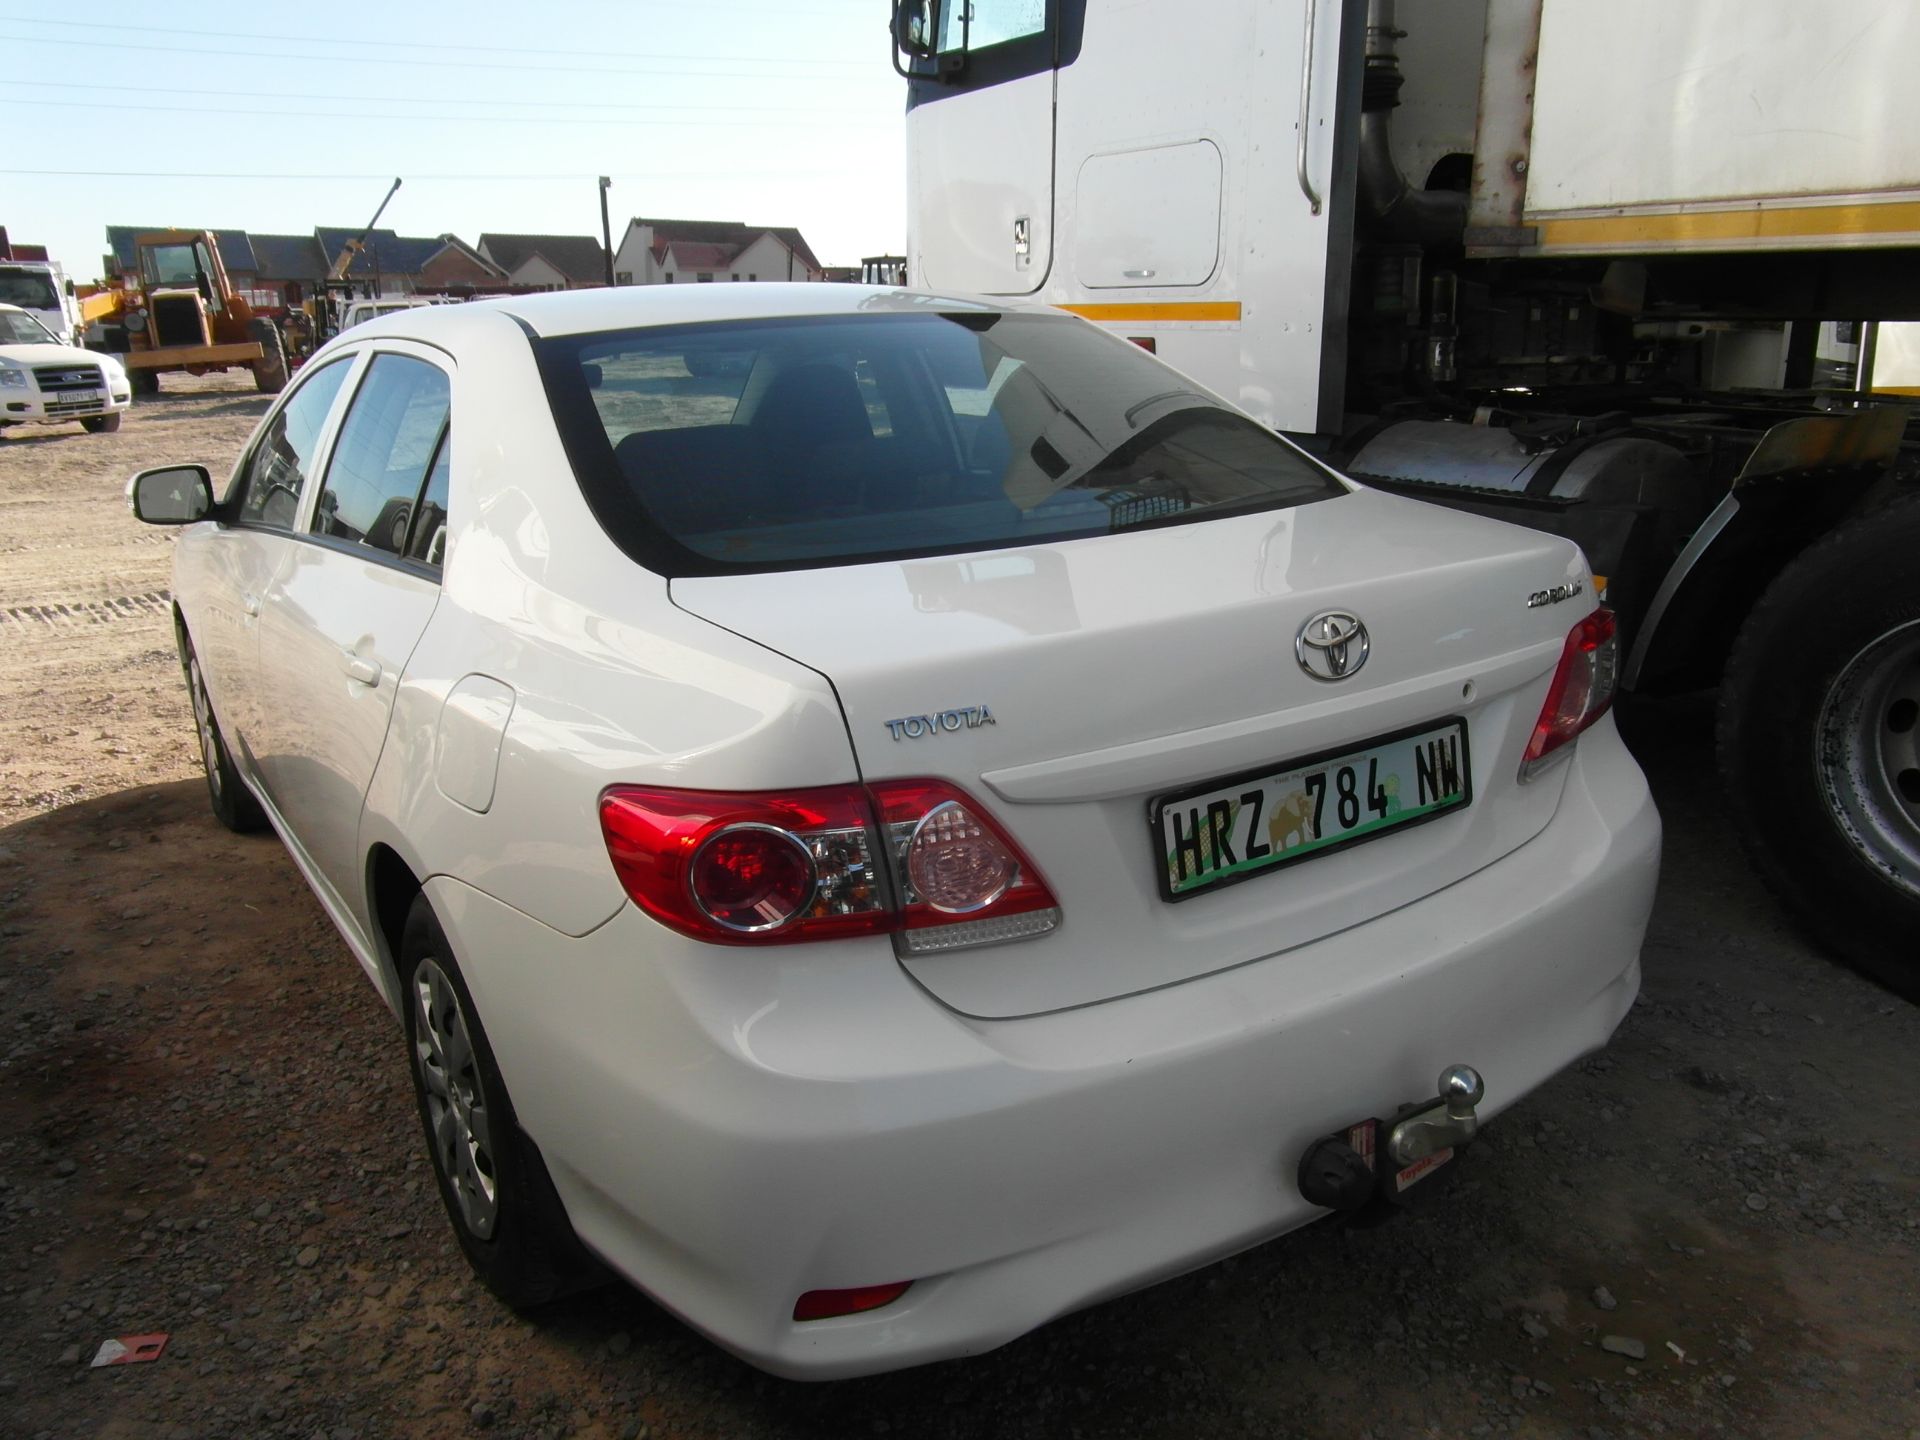 2011 HRZ784NW Toyota Corolla 1.3 Professional (Vin No: AHTLT58E206027539 )(87 385 kms) - Image 4 of 4